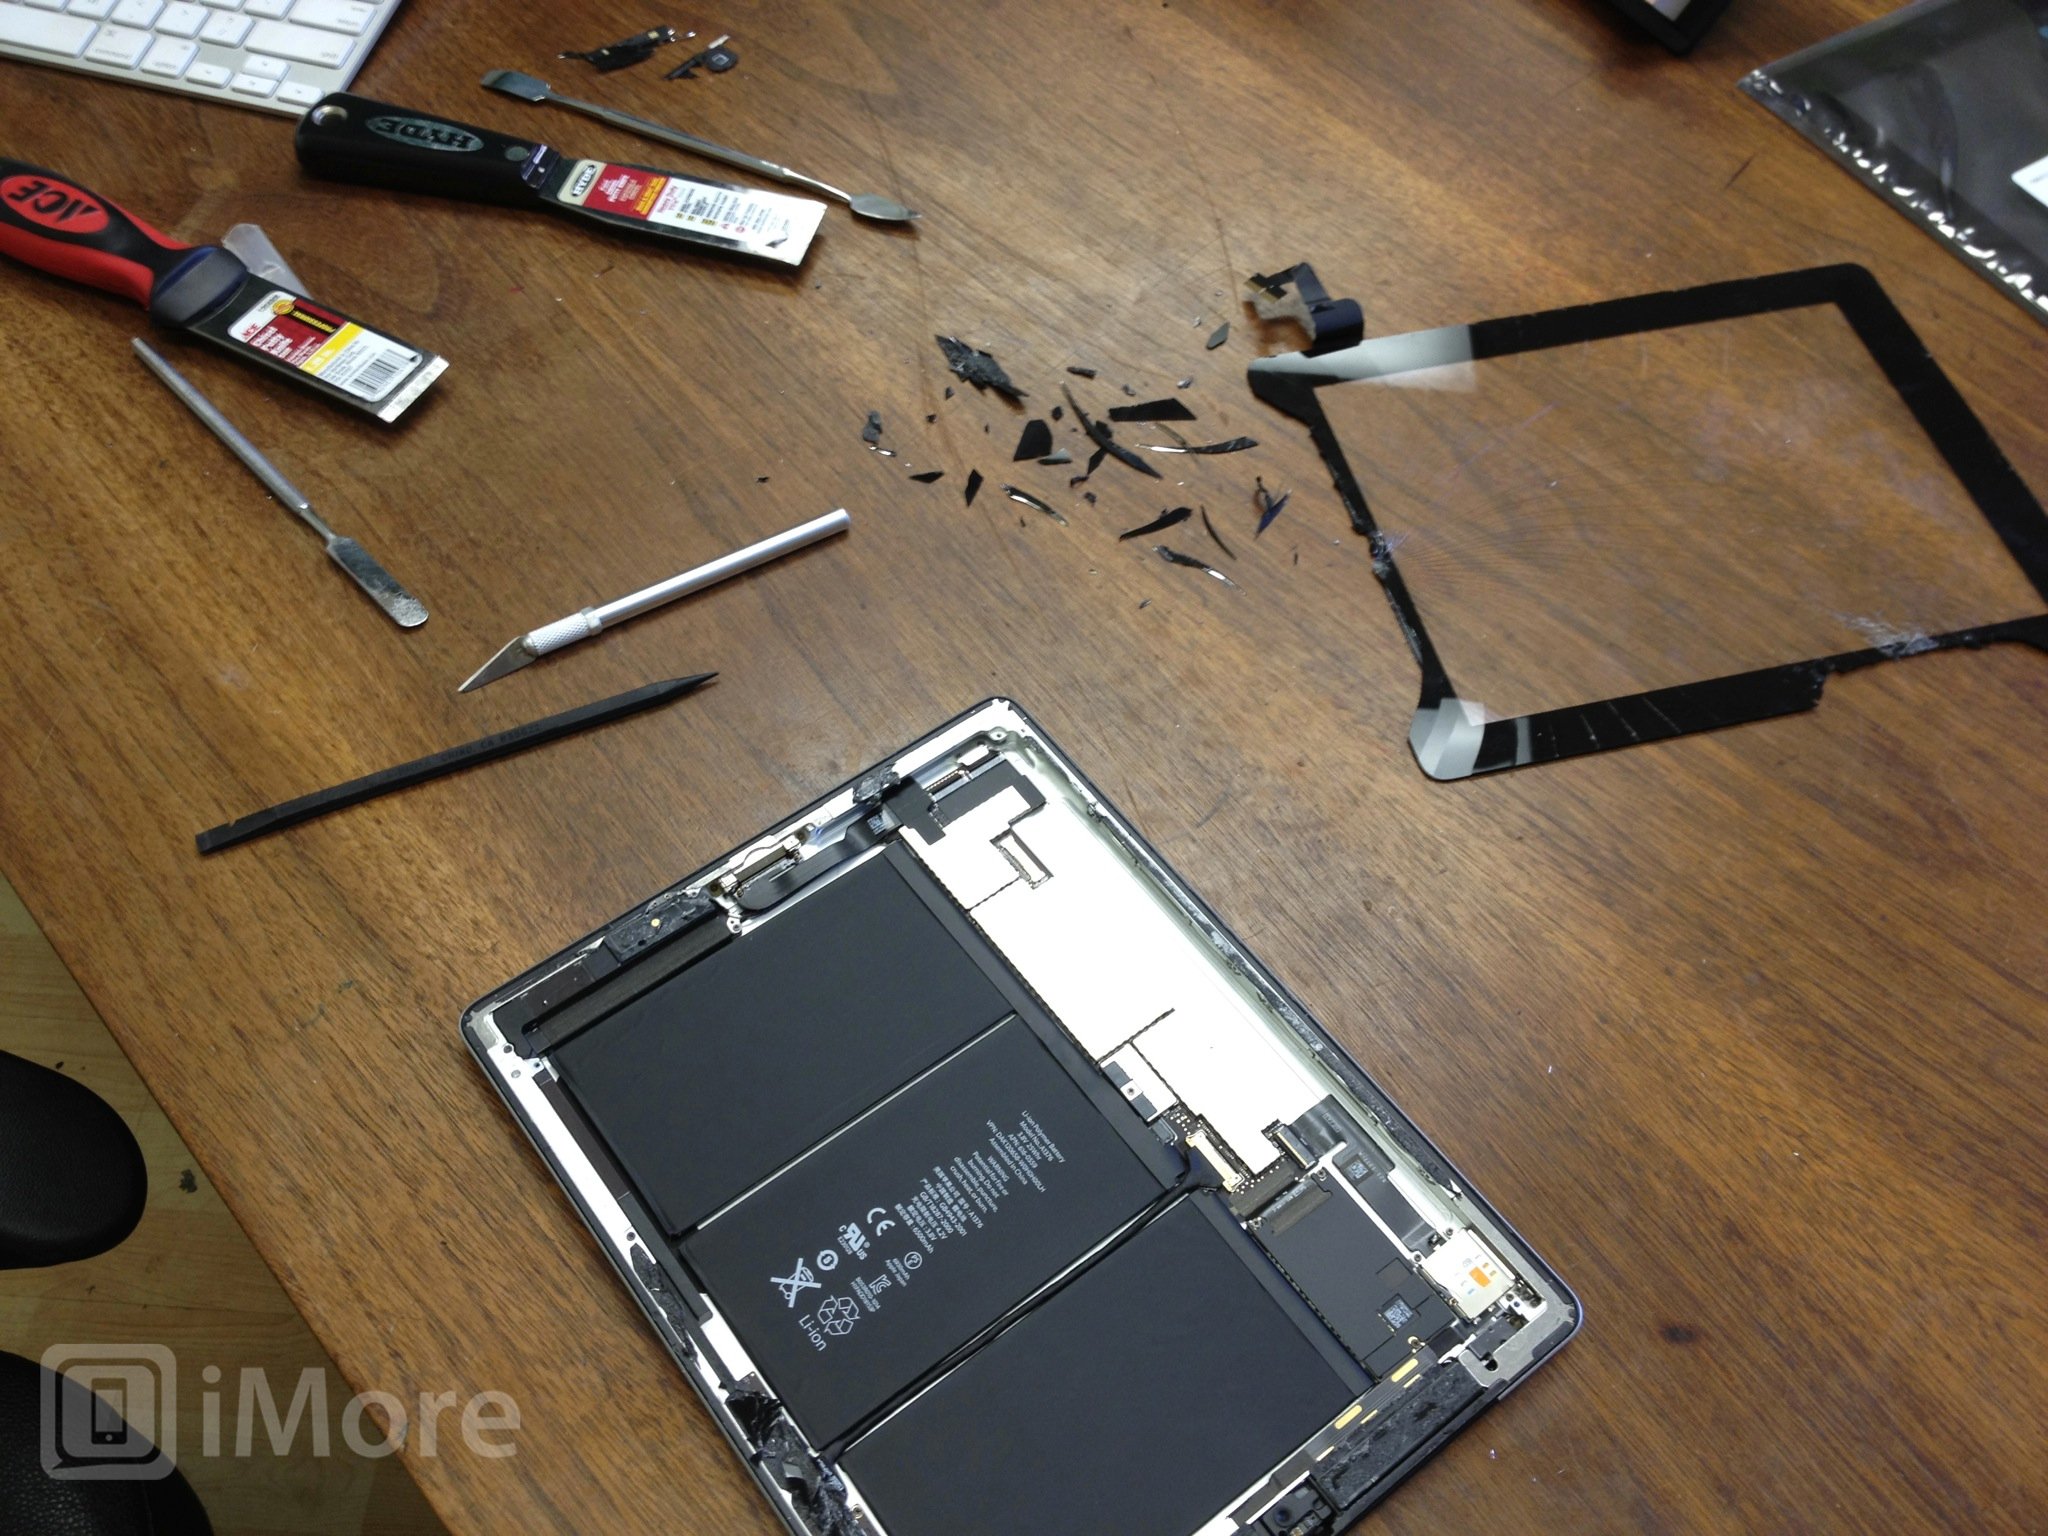 Repairing a new iPad or iPad 2 is almost impossible and messy